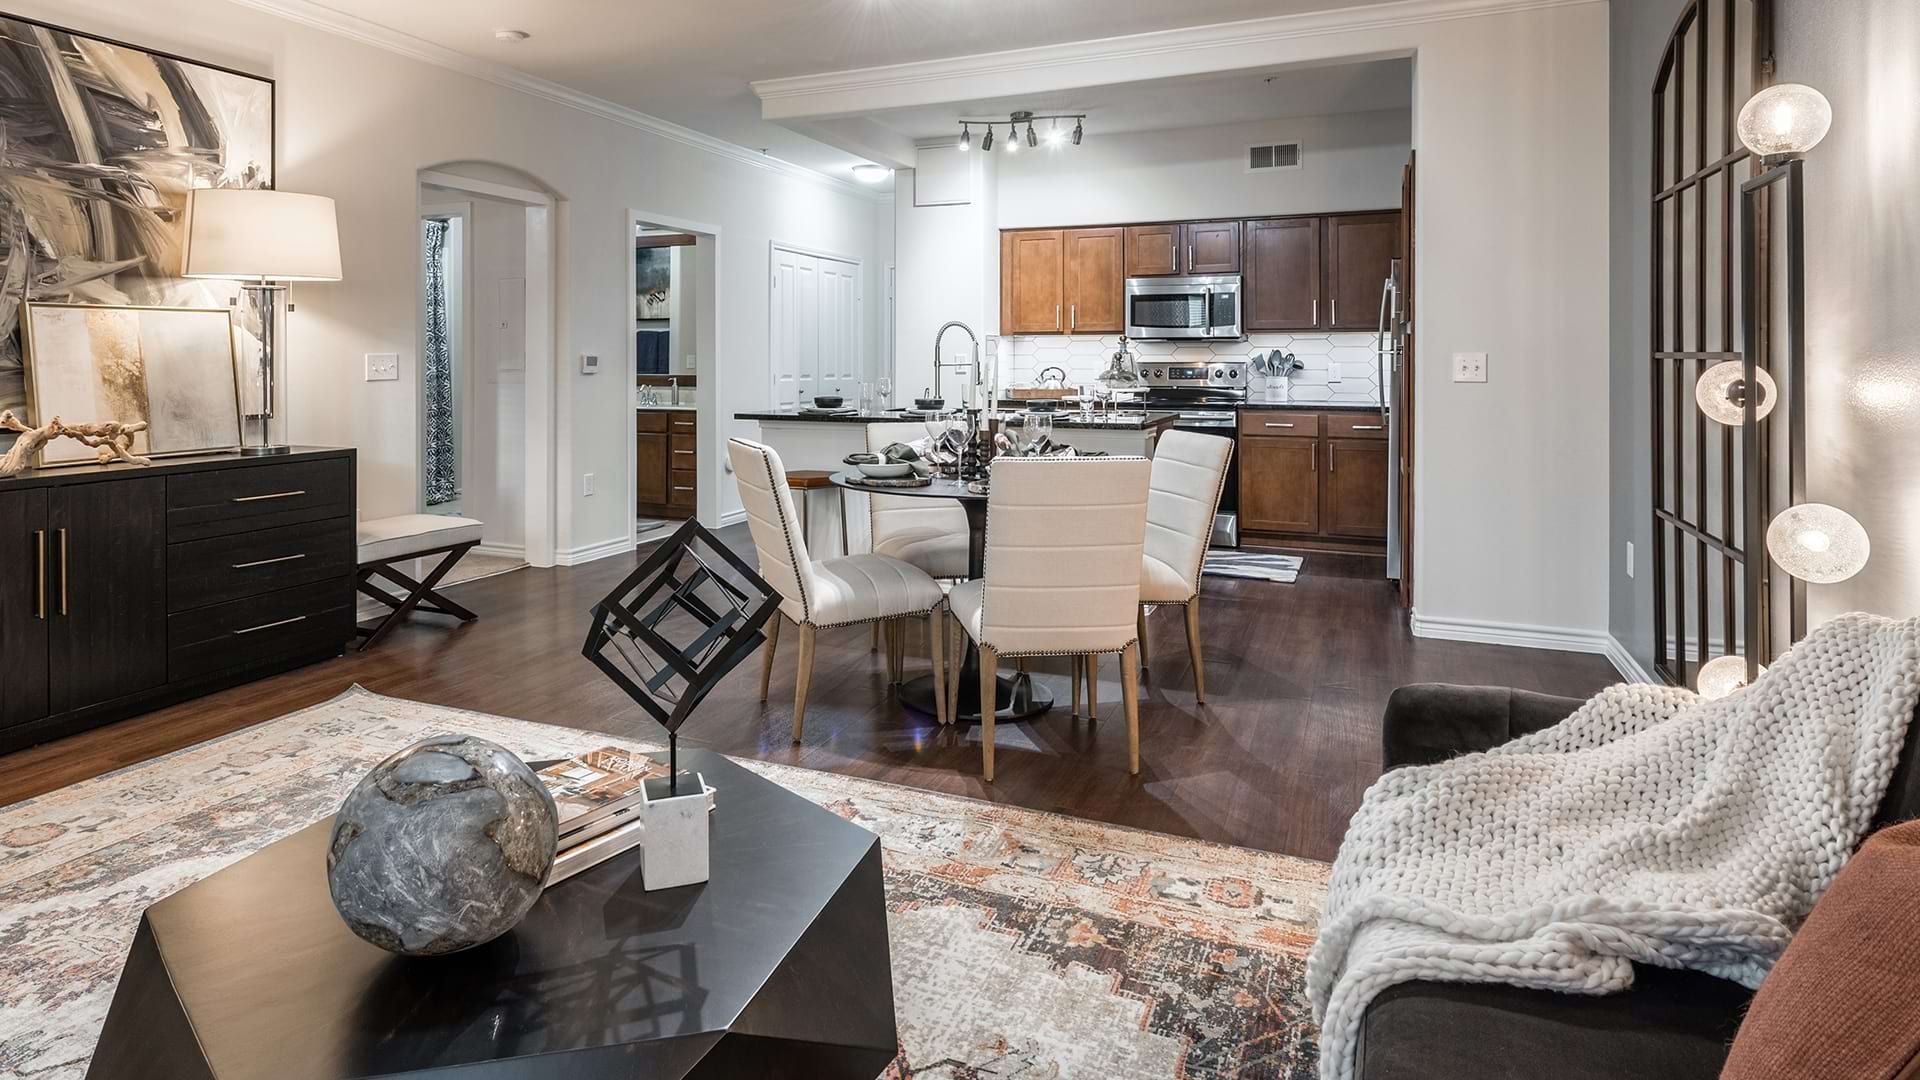 Living areas at luxury apartments in Farmers Branch, TX